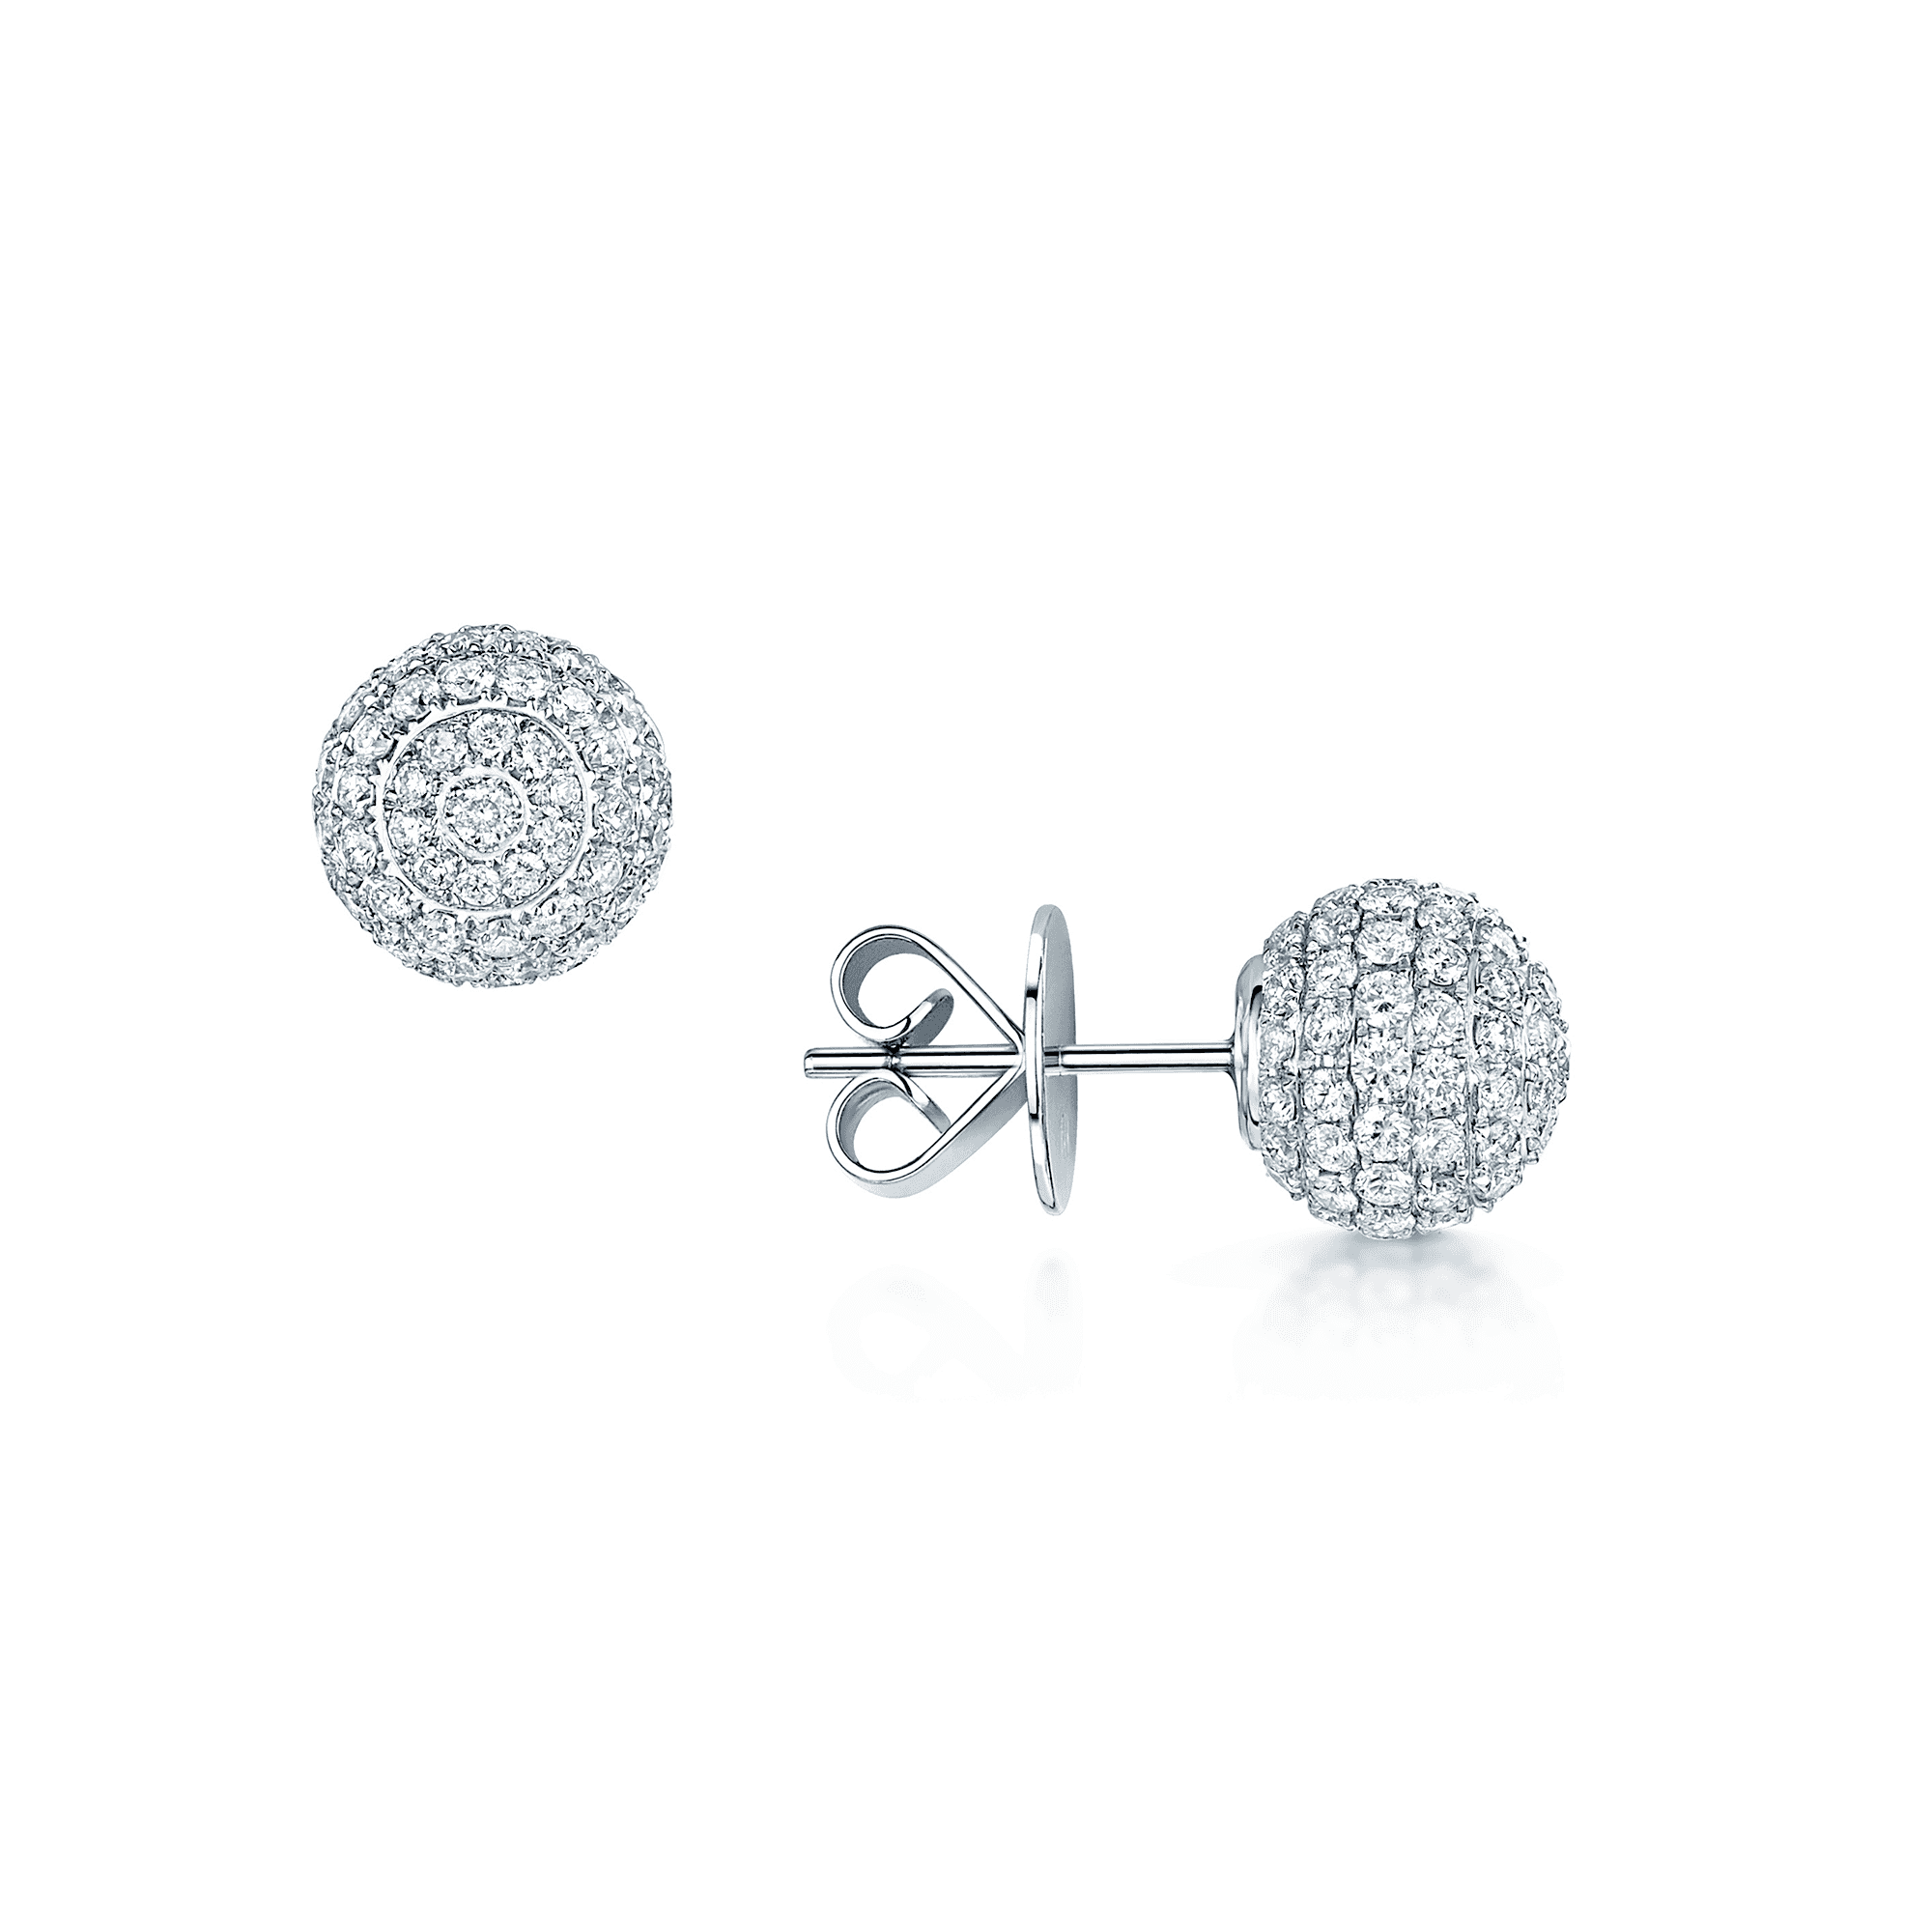 18ct White Gold Pave Diamond Set Sphere Earrings With Detachable South Sea Pearls